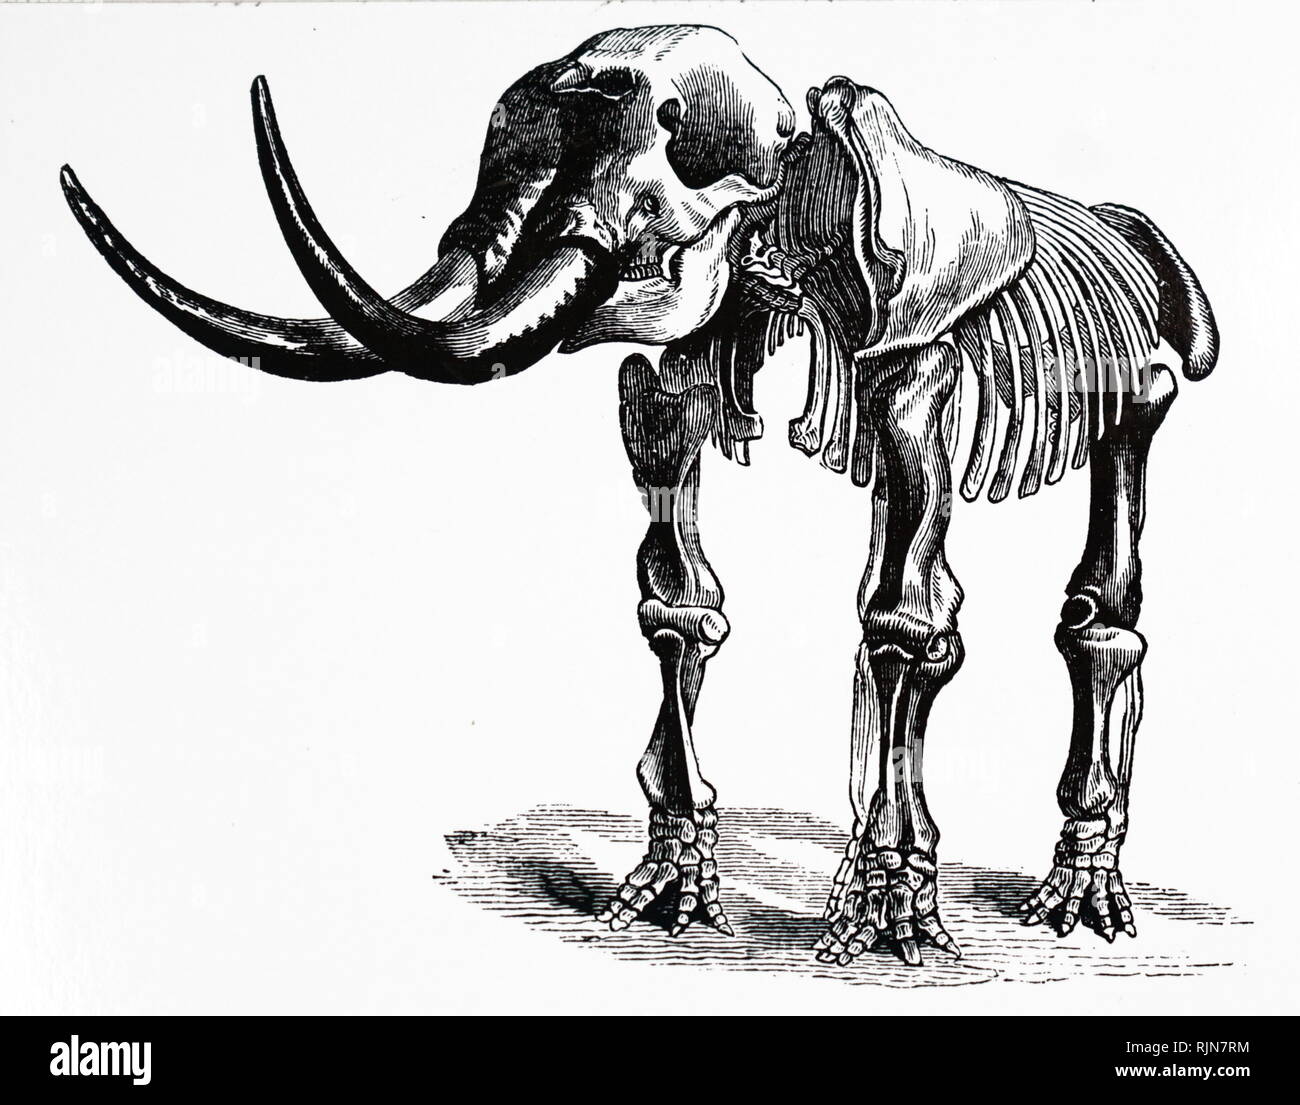 An engraving depicting the restored skeleton of a Mastodon. Mastodons are any species of extinct proboscideans in the genus Mammut, distantly related to elephants, that inhabited North and Central America during the late Miocene or late Pliocene period. Dated 19th century Stock Photo